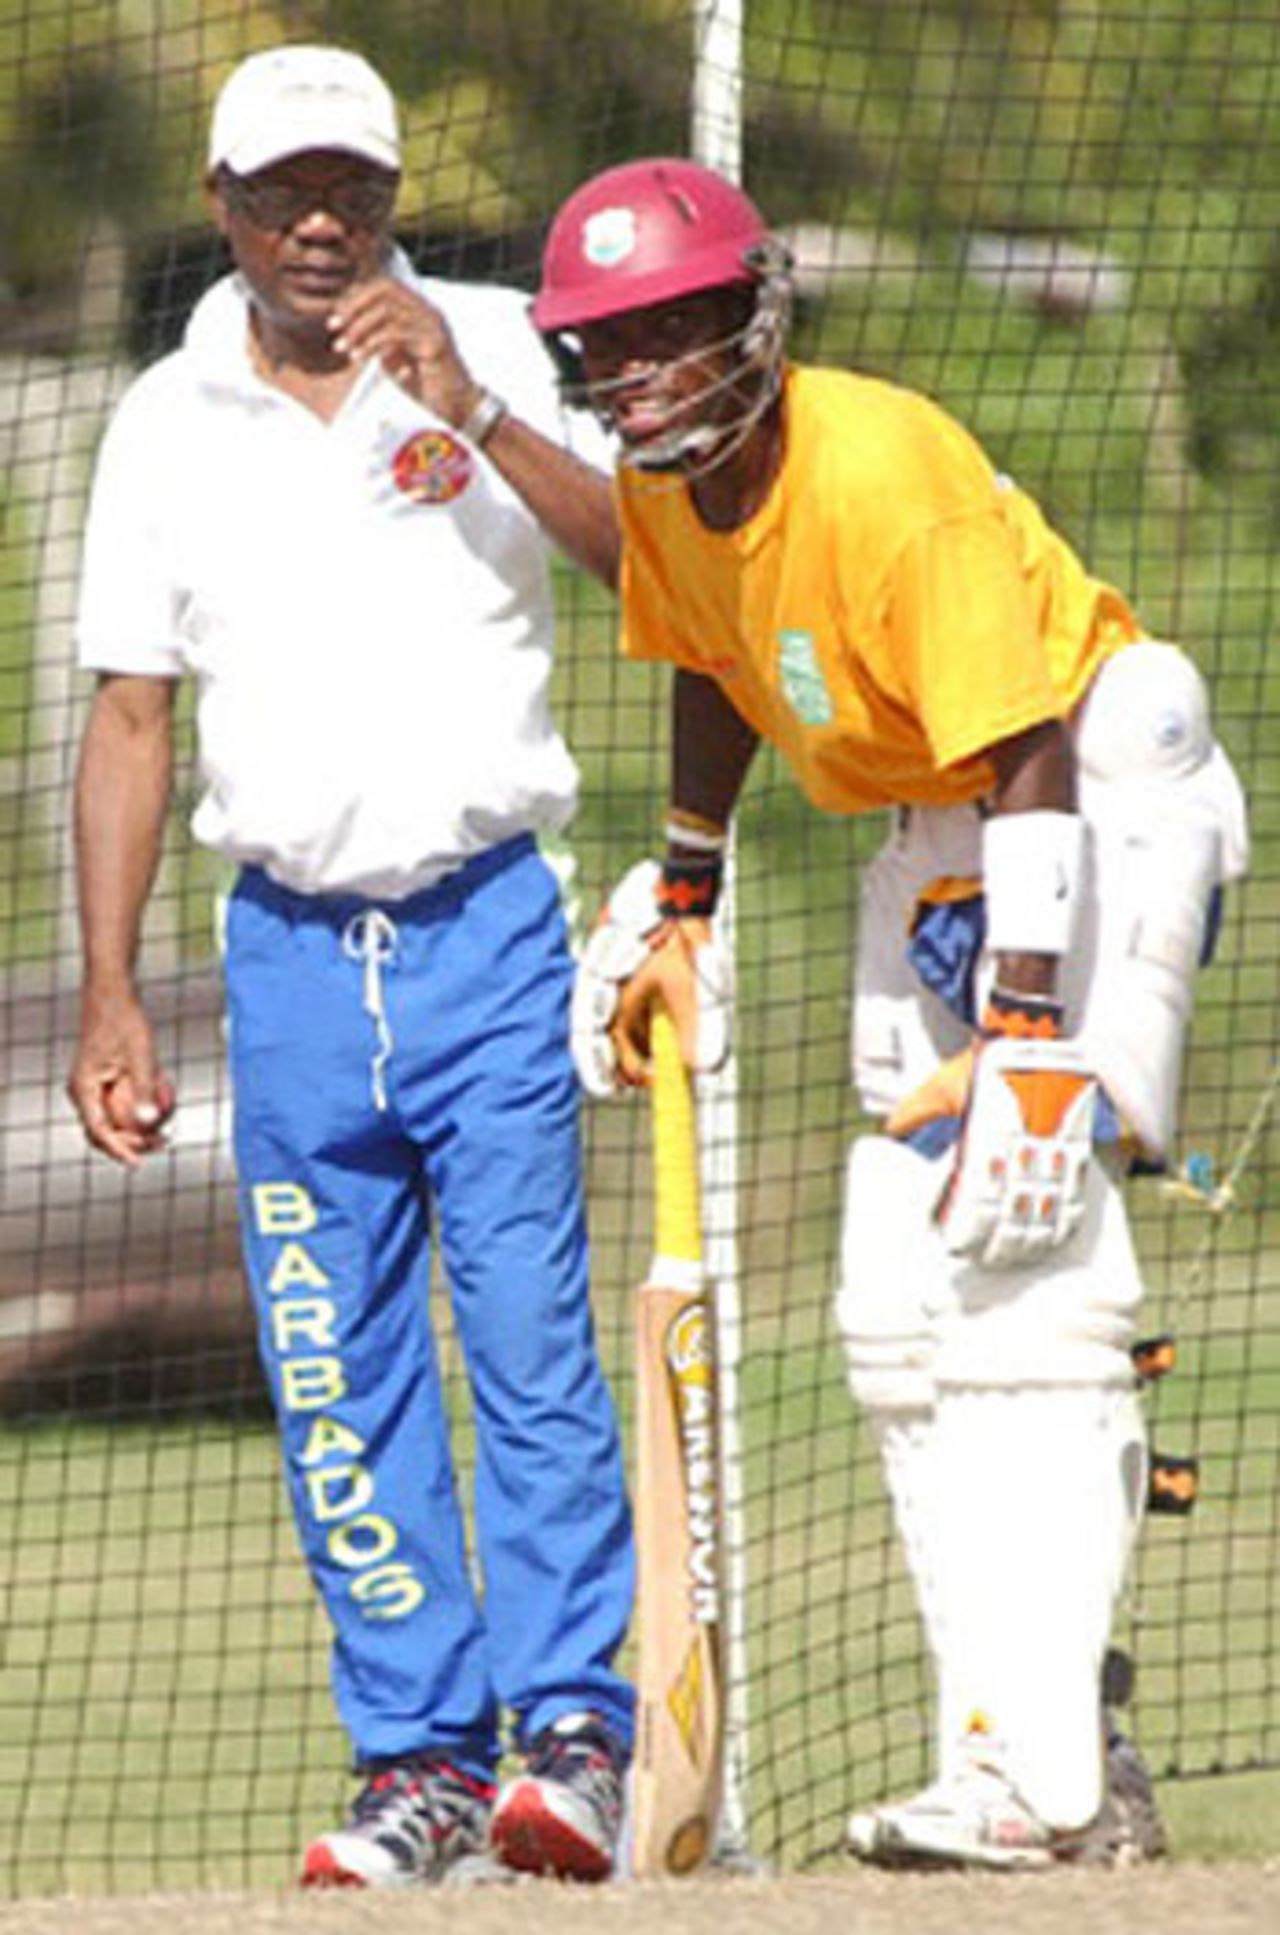 Seymour Nurse oversees Fidel Edwards in the nets at Barbados's Yorkshire Sports Club, Barbados, December 31, 2006